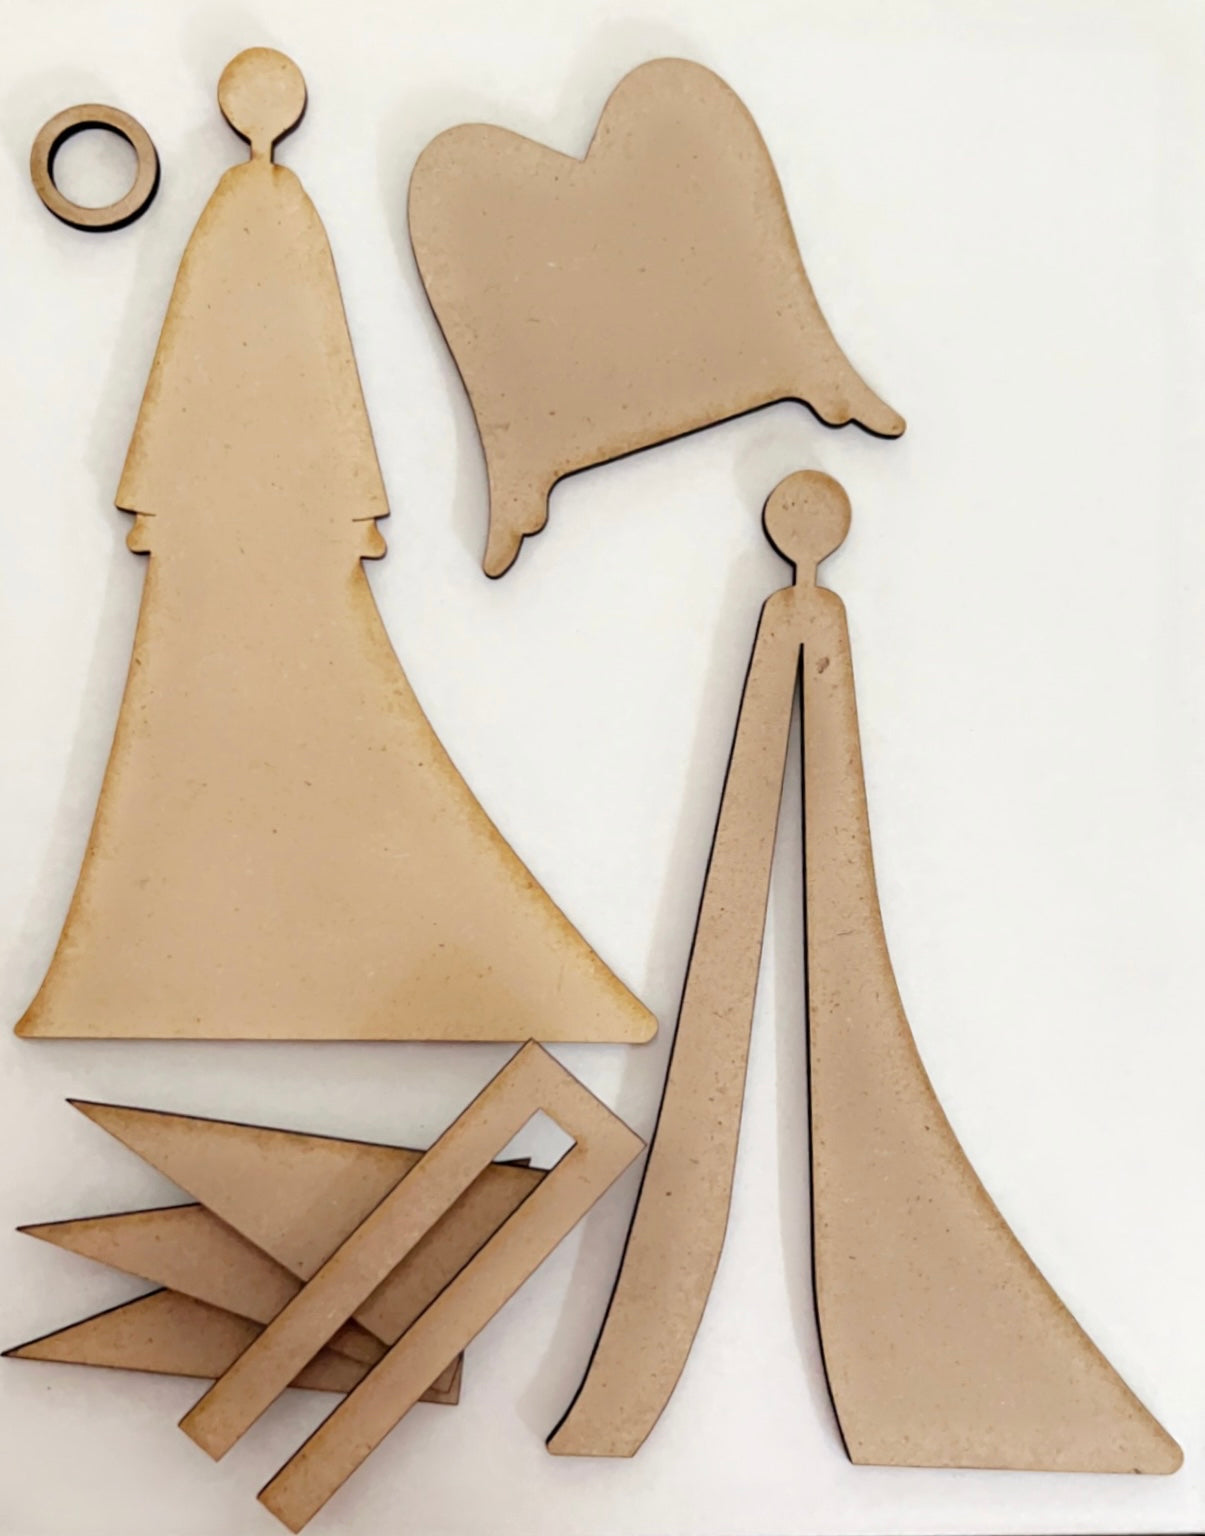 Simplicity Angel - DIY Craft Kit - Available in 2 sizes